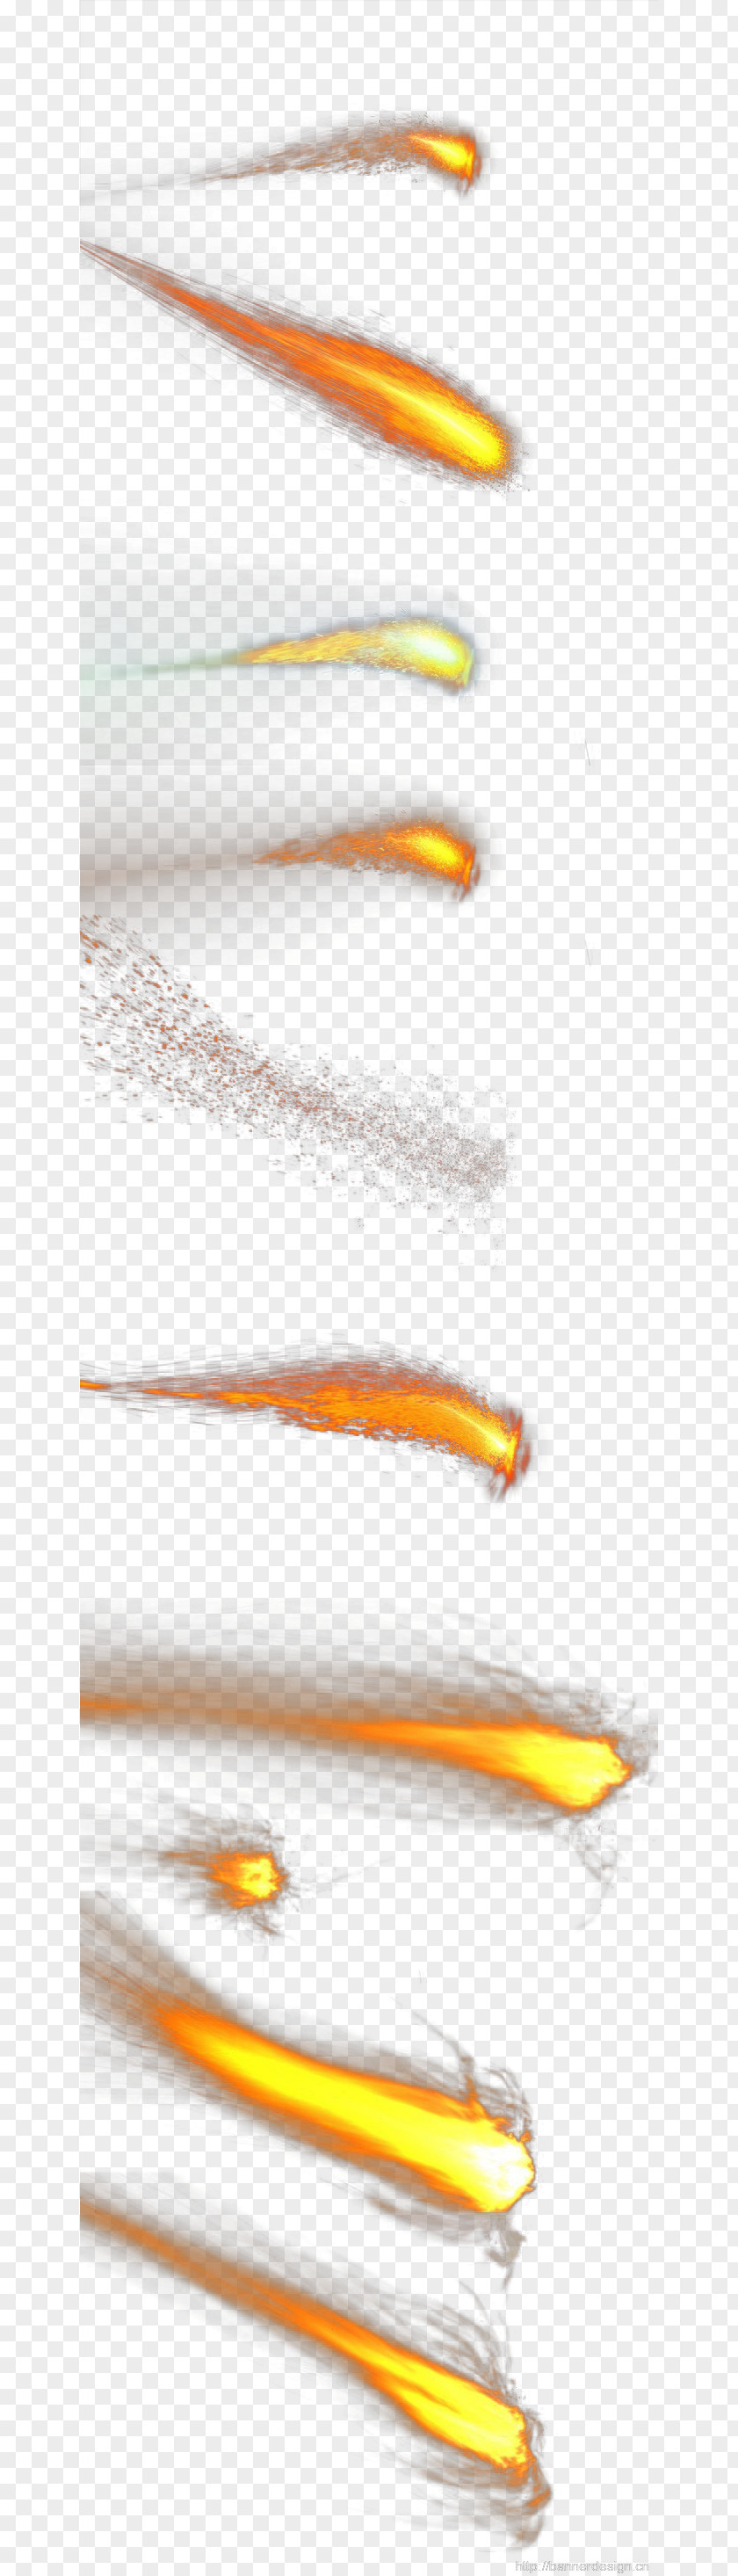 Spilled Sand Flame PNG